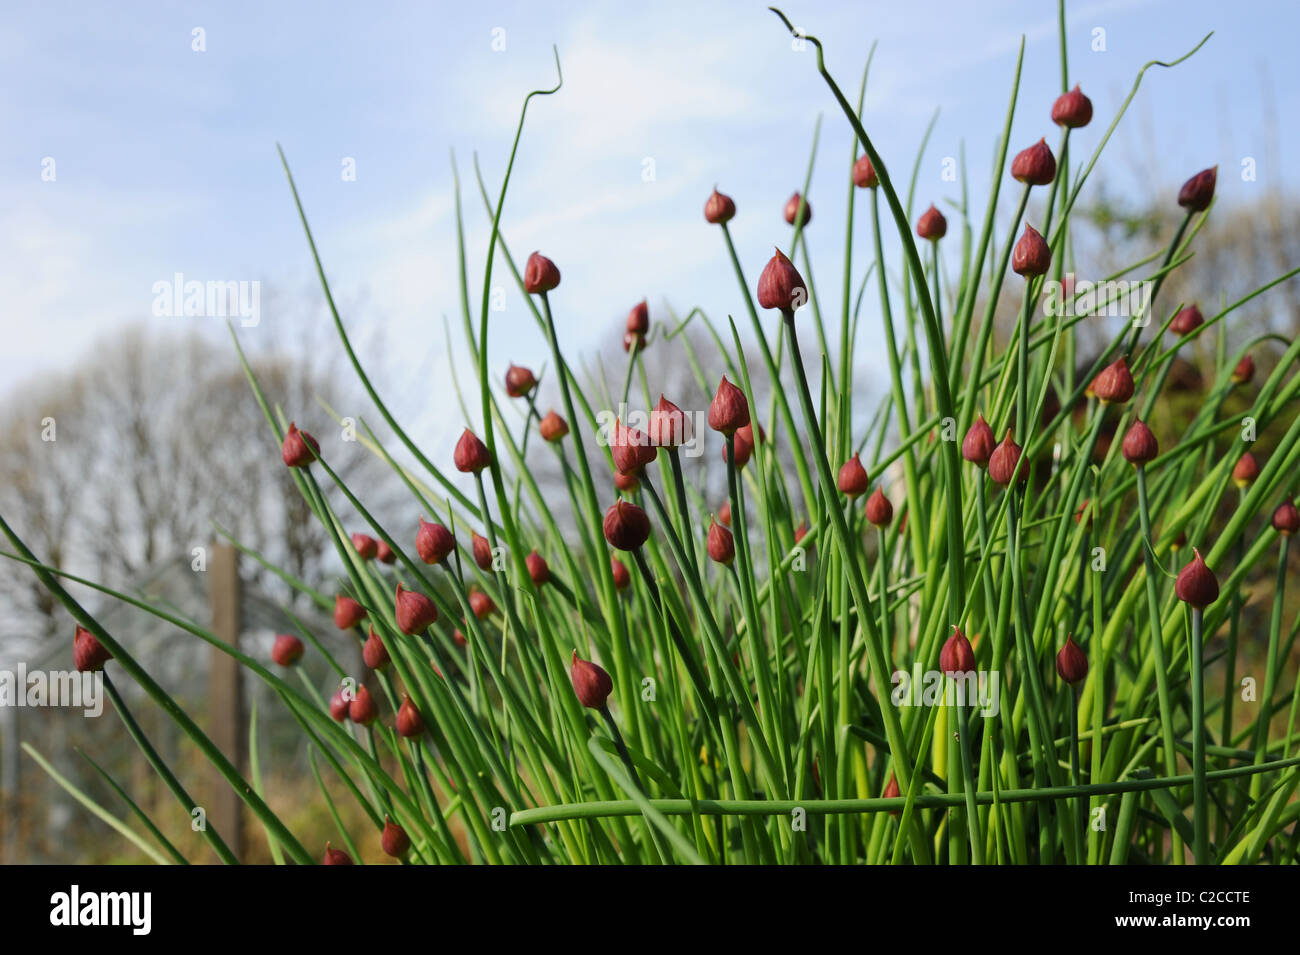 Flower buds on a chives plant Stock Photo